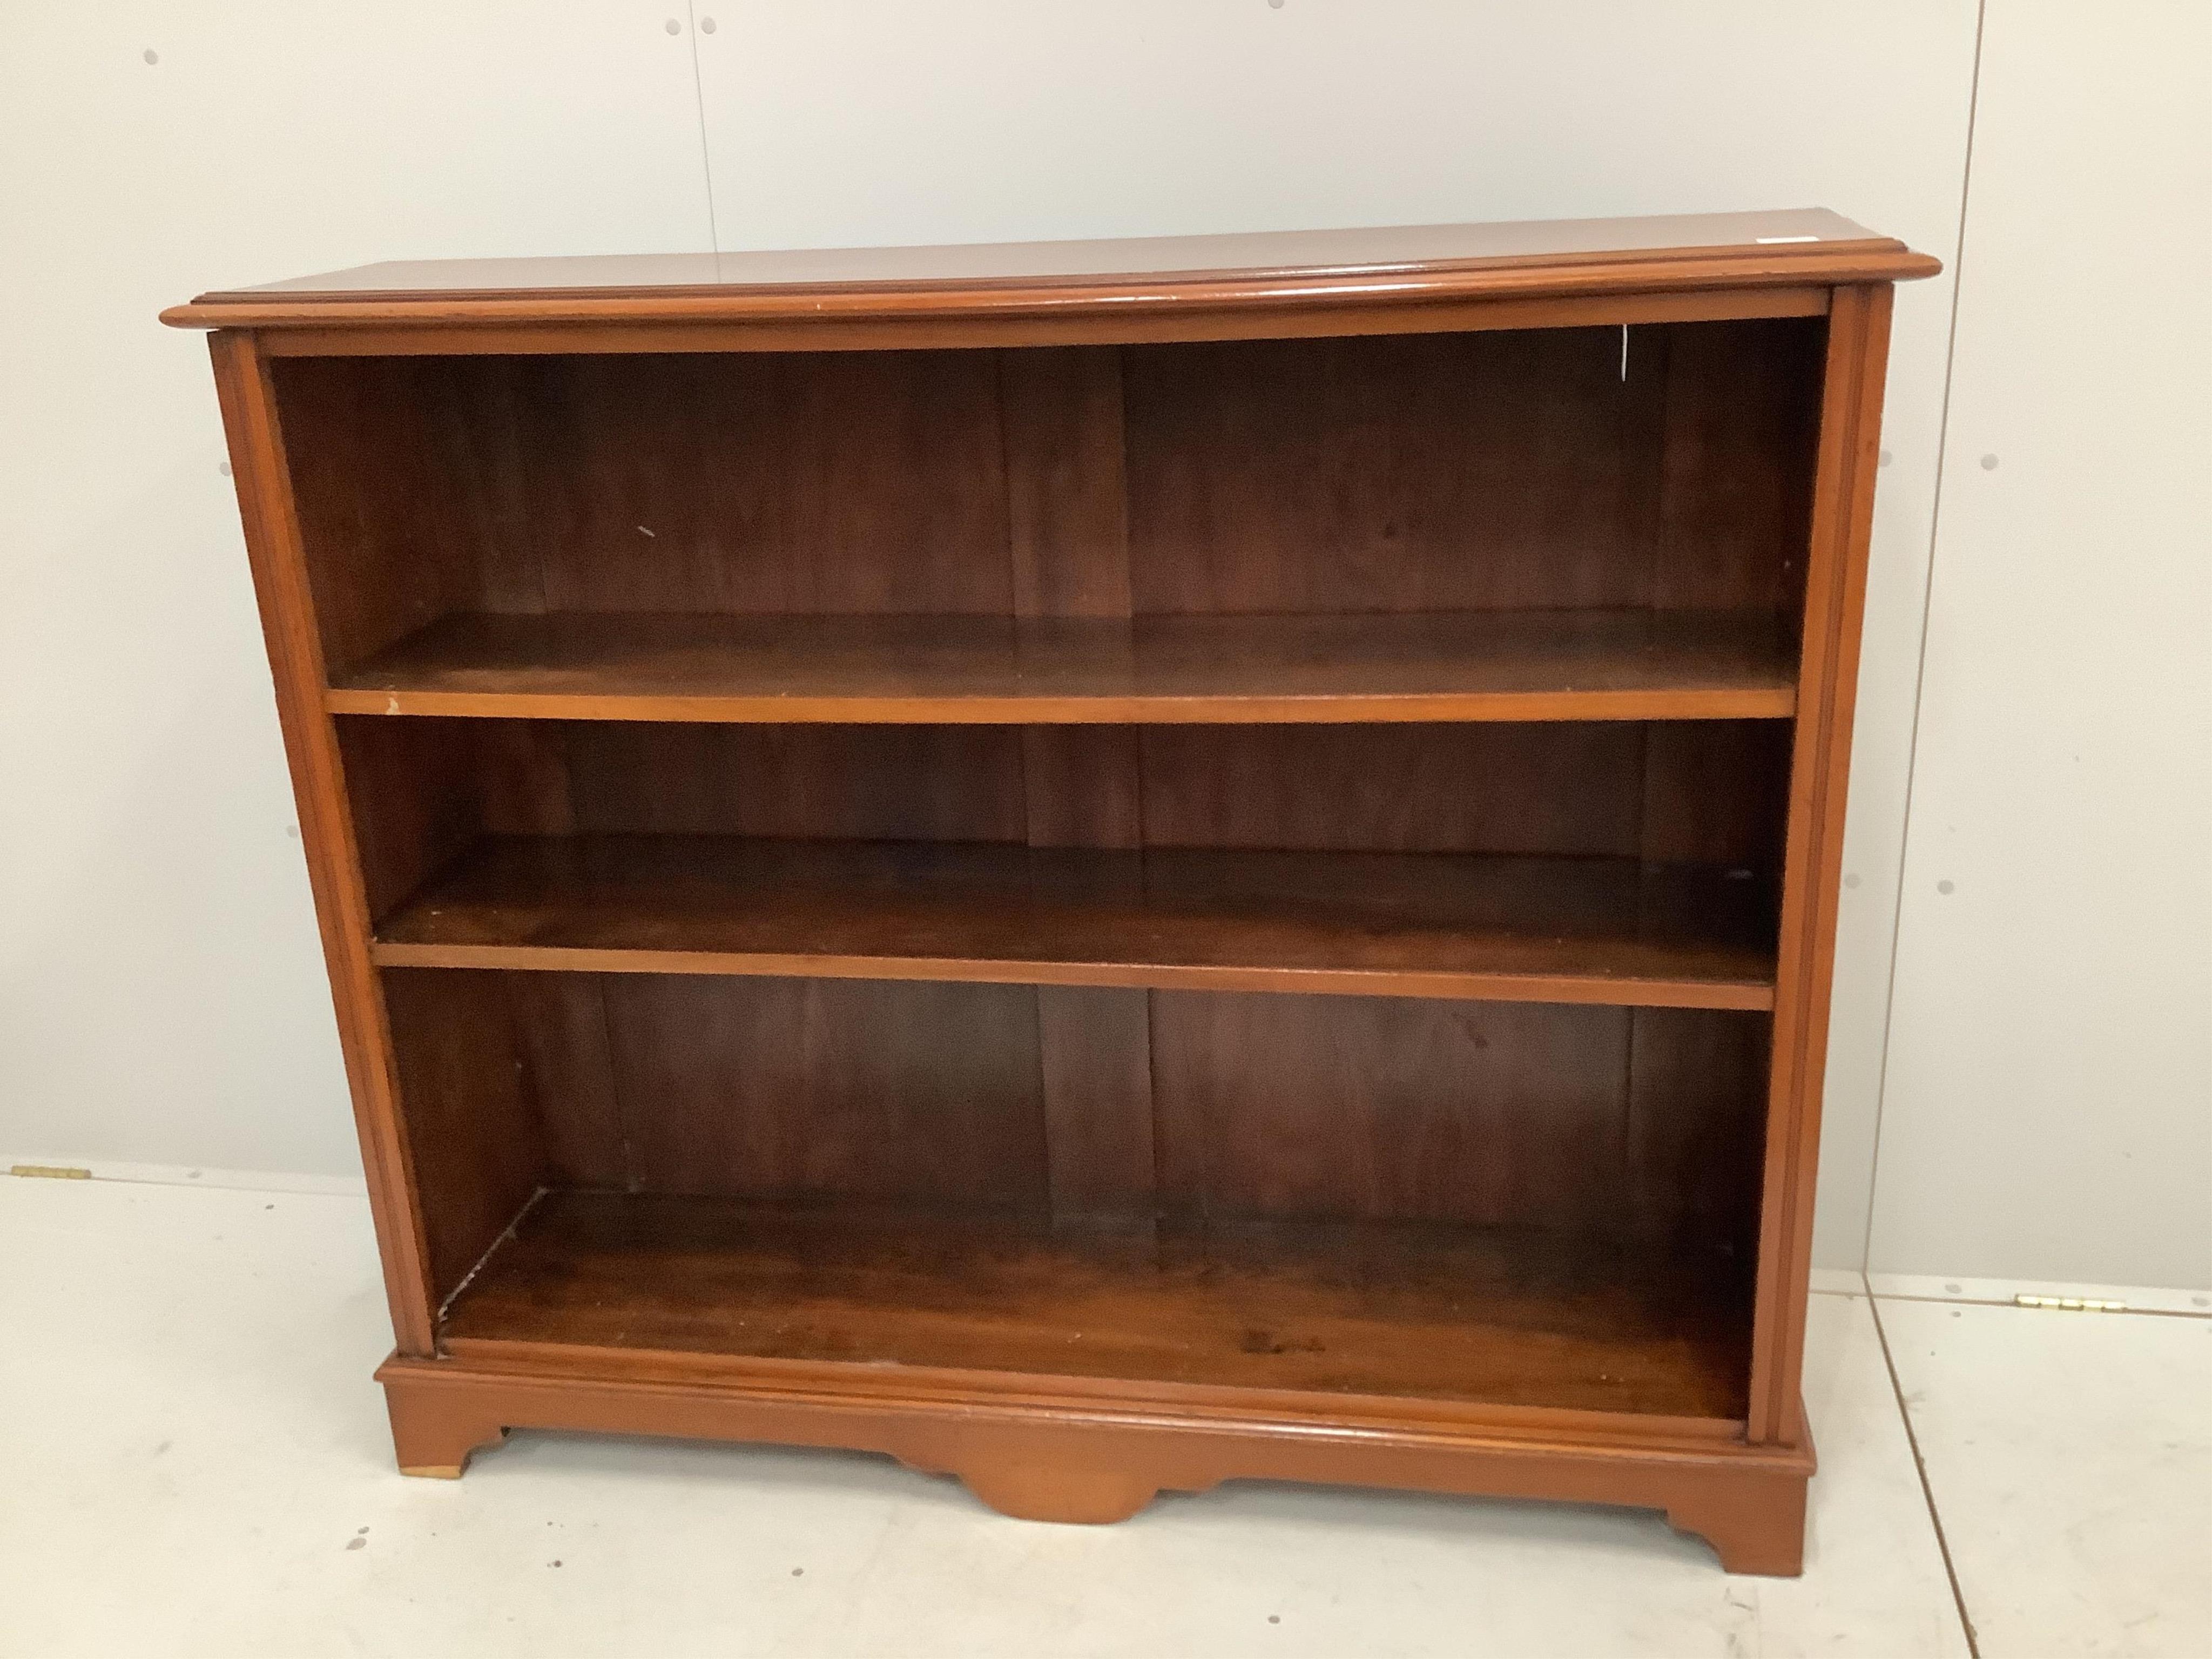 A reproduction Victorian style walnut open bookcase, width 135cm, depth 32cm, height 114cm. Condition - good